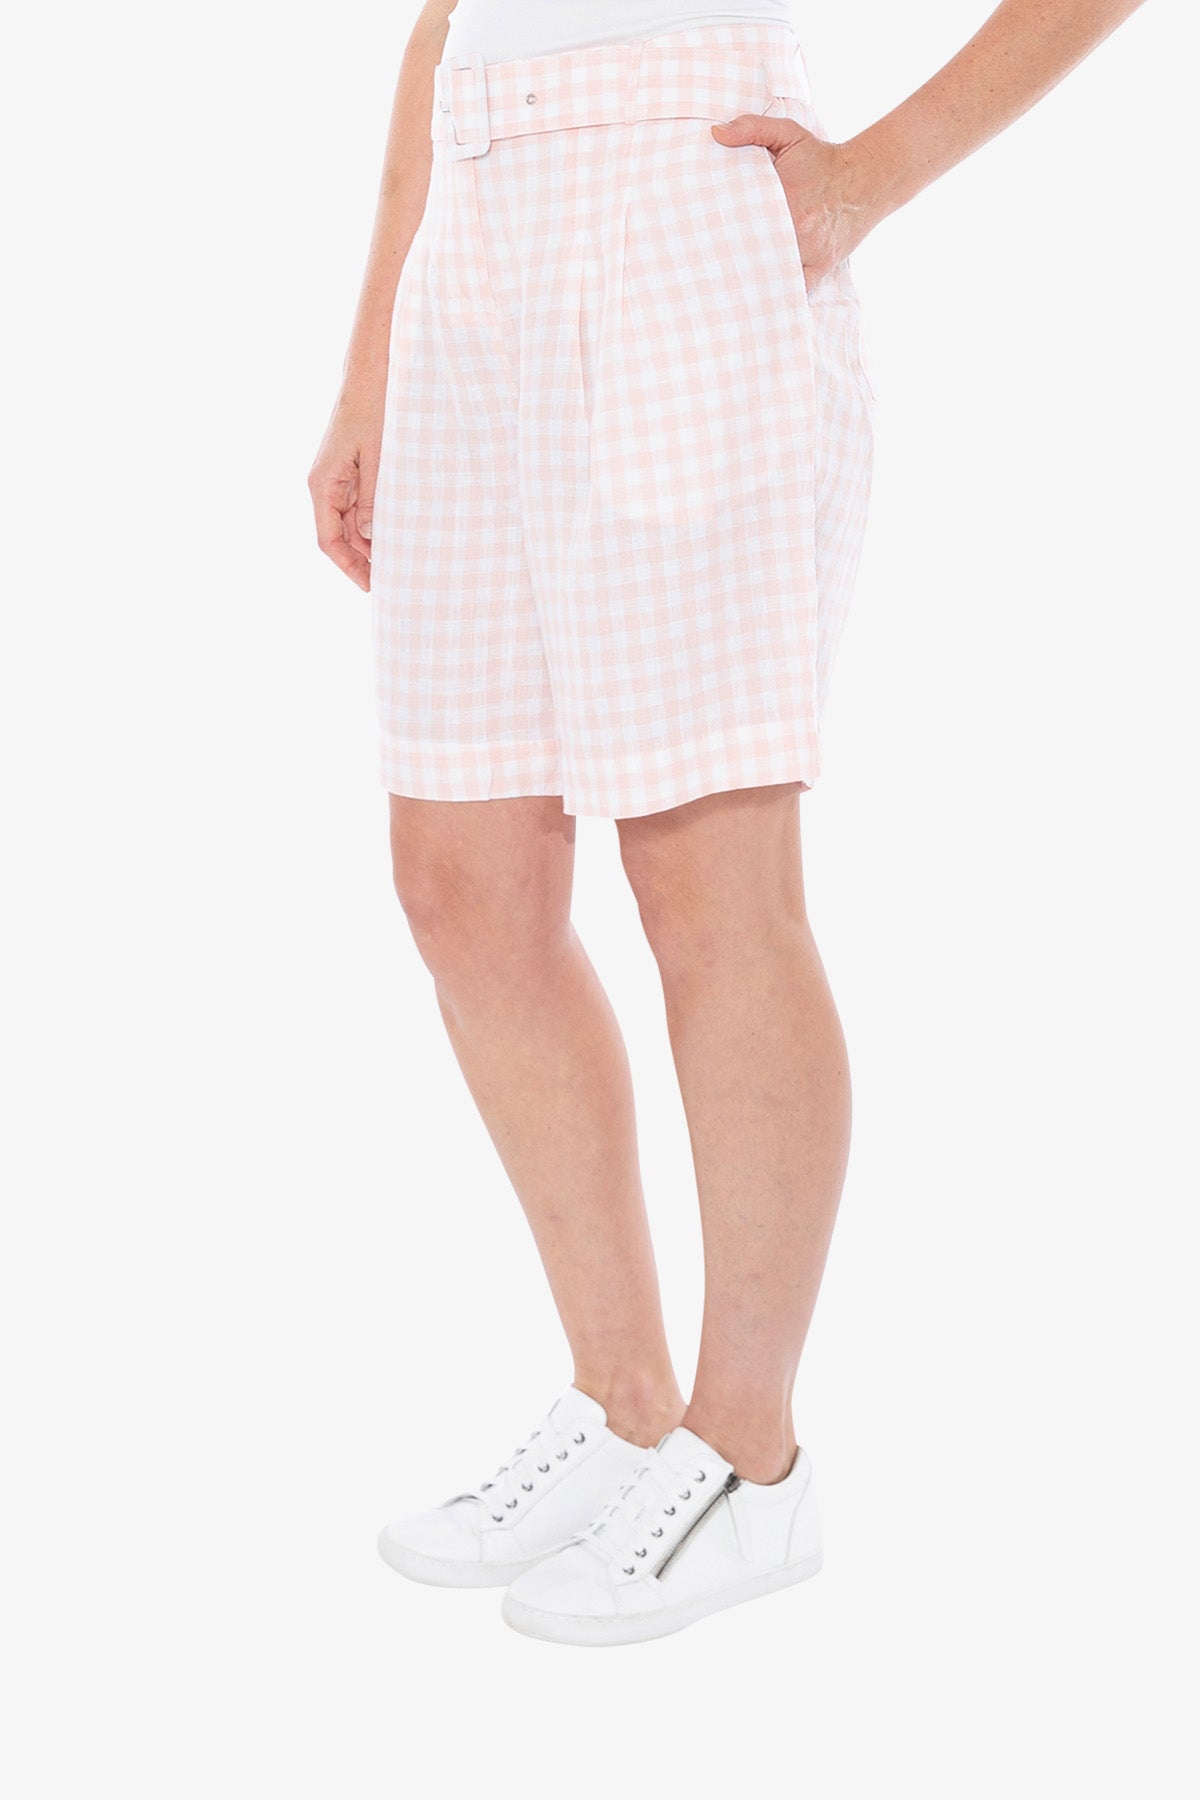 Gingham Palazzo Short Petal and White